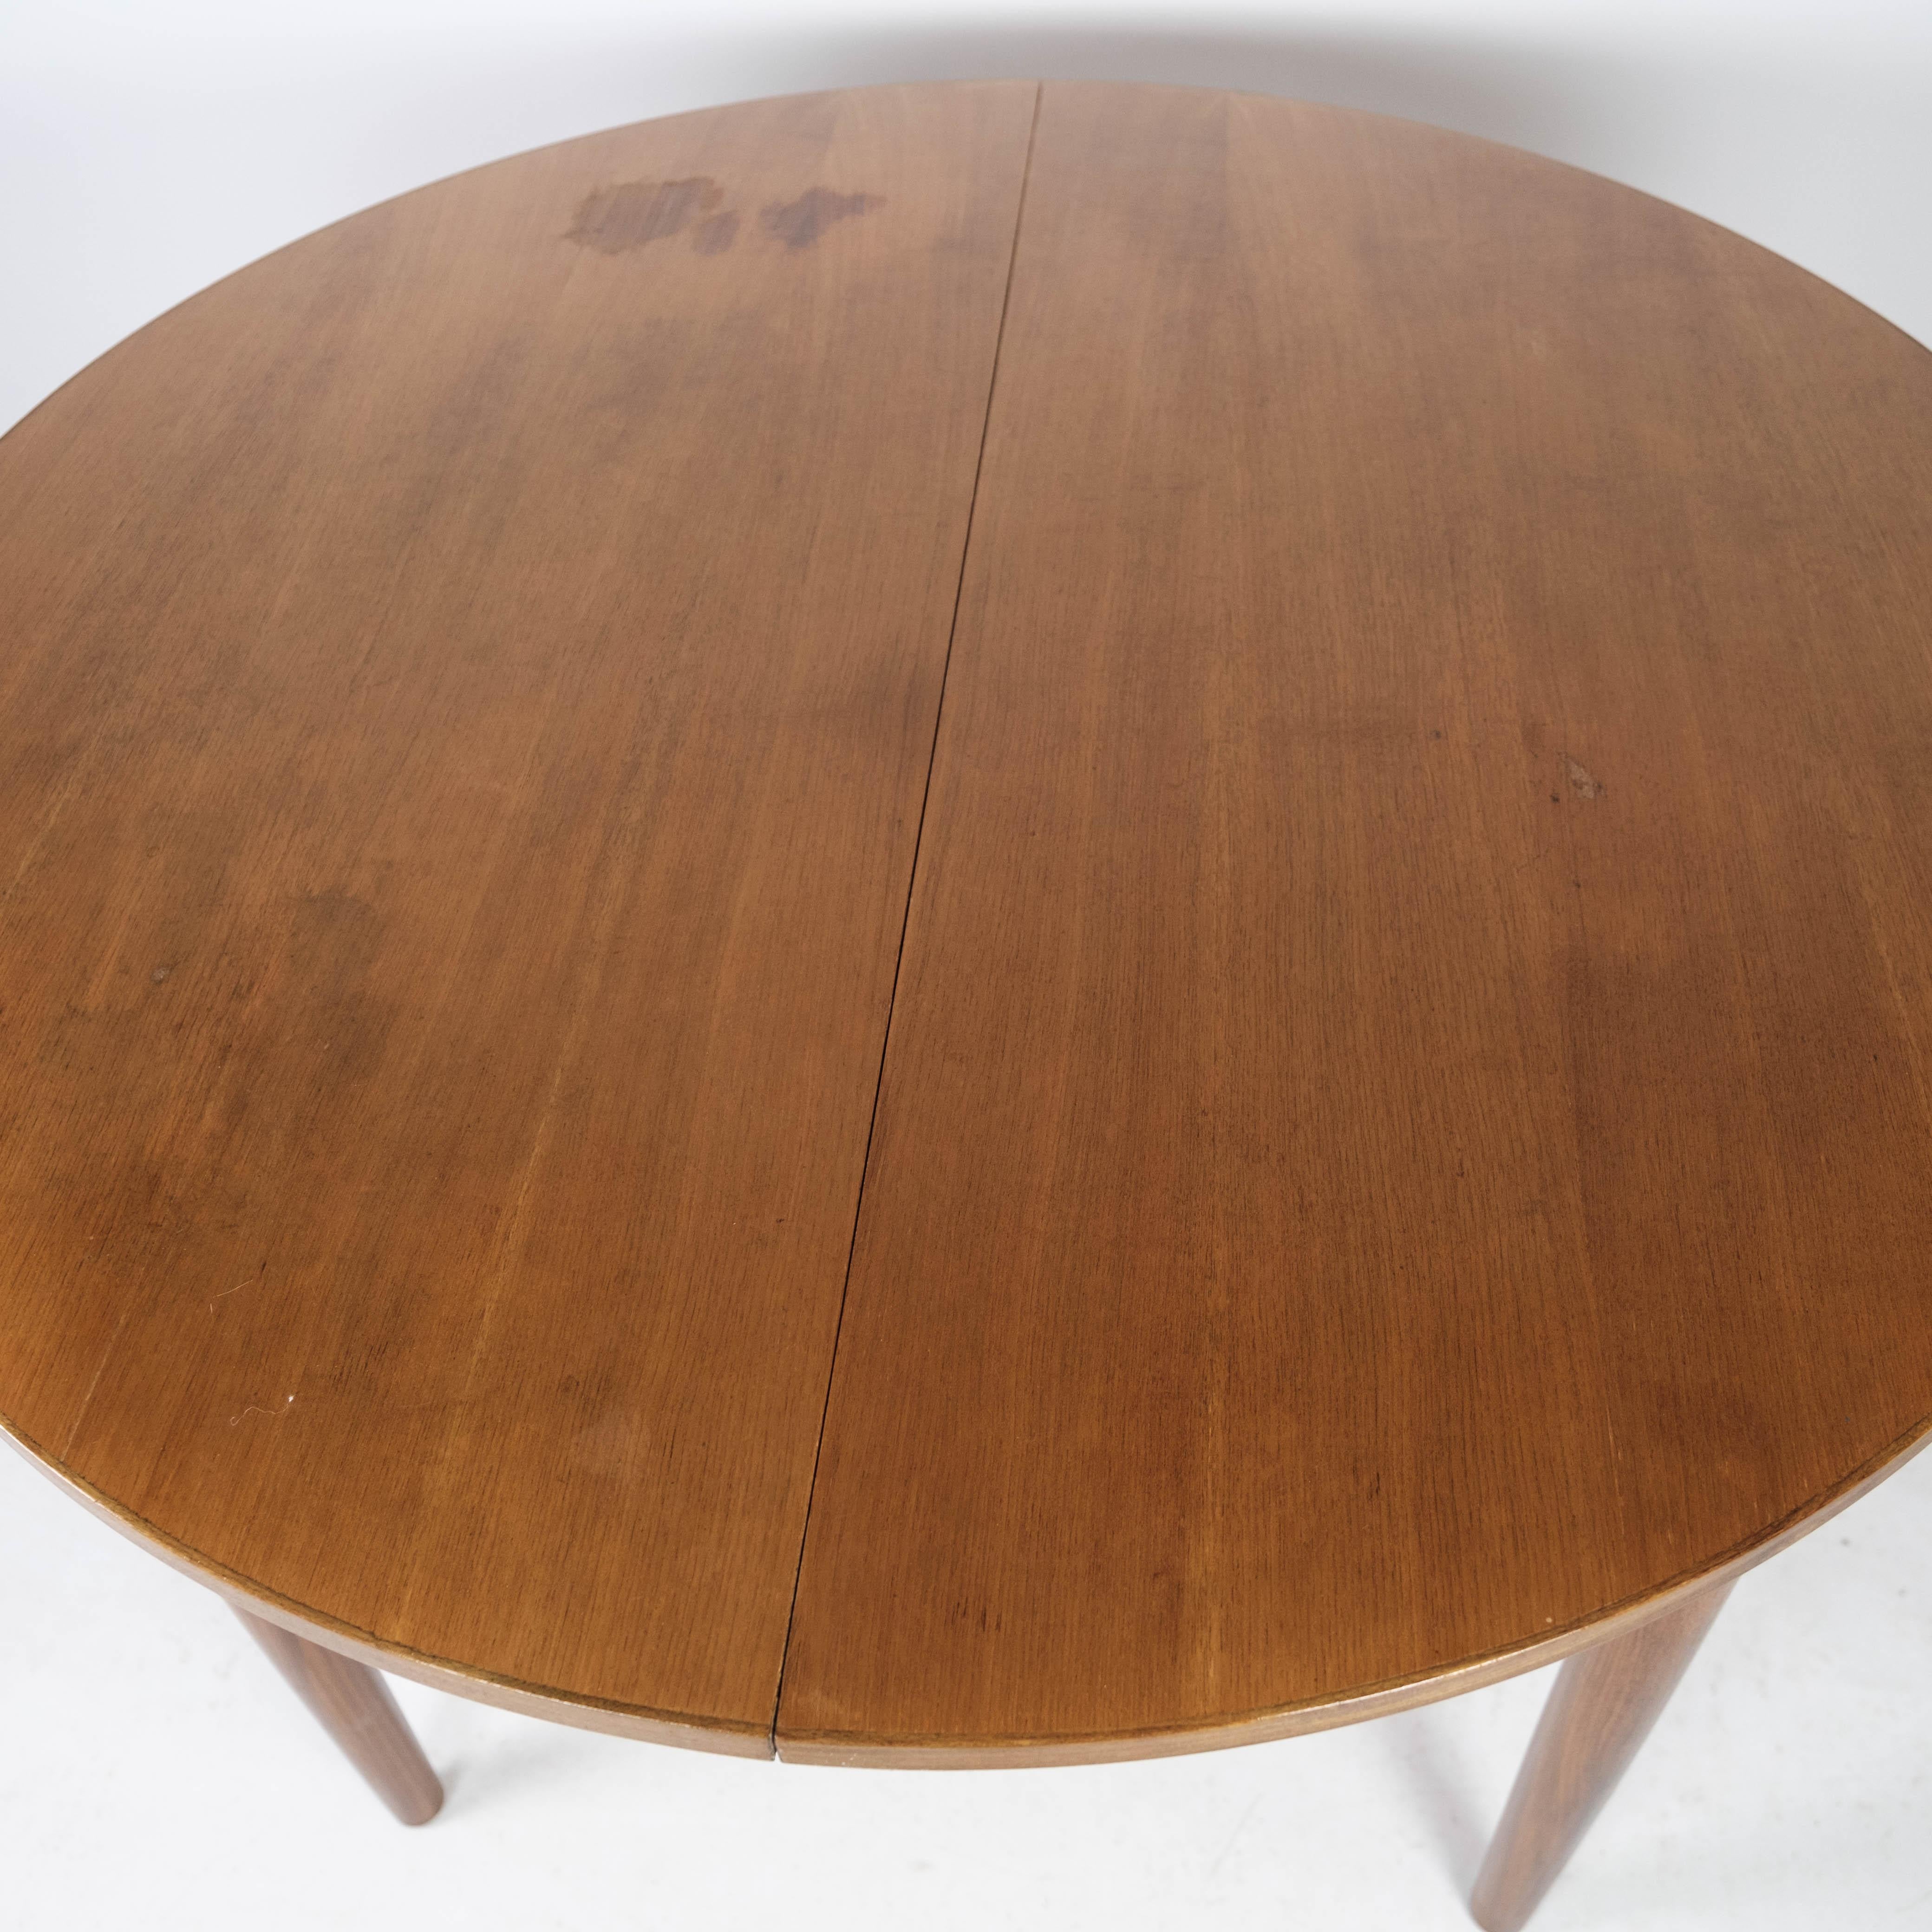 Dining Table Made In Teak With Extensions, Danish Design From 1960s In Good Condition For Sale In Lejre, DK